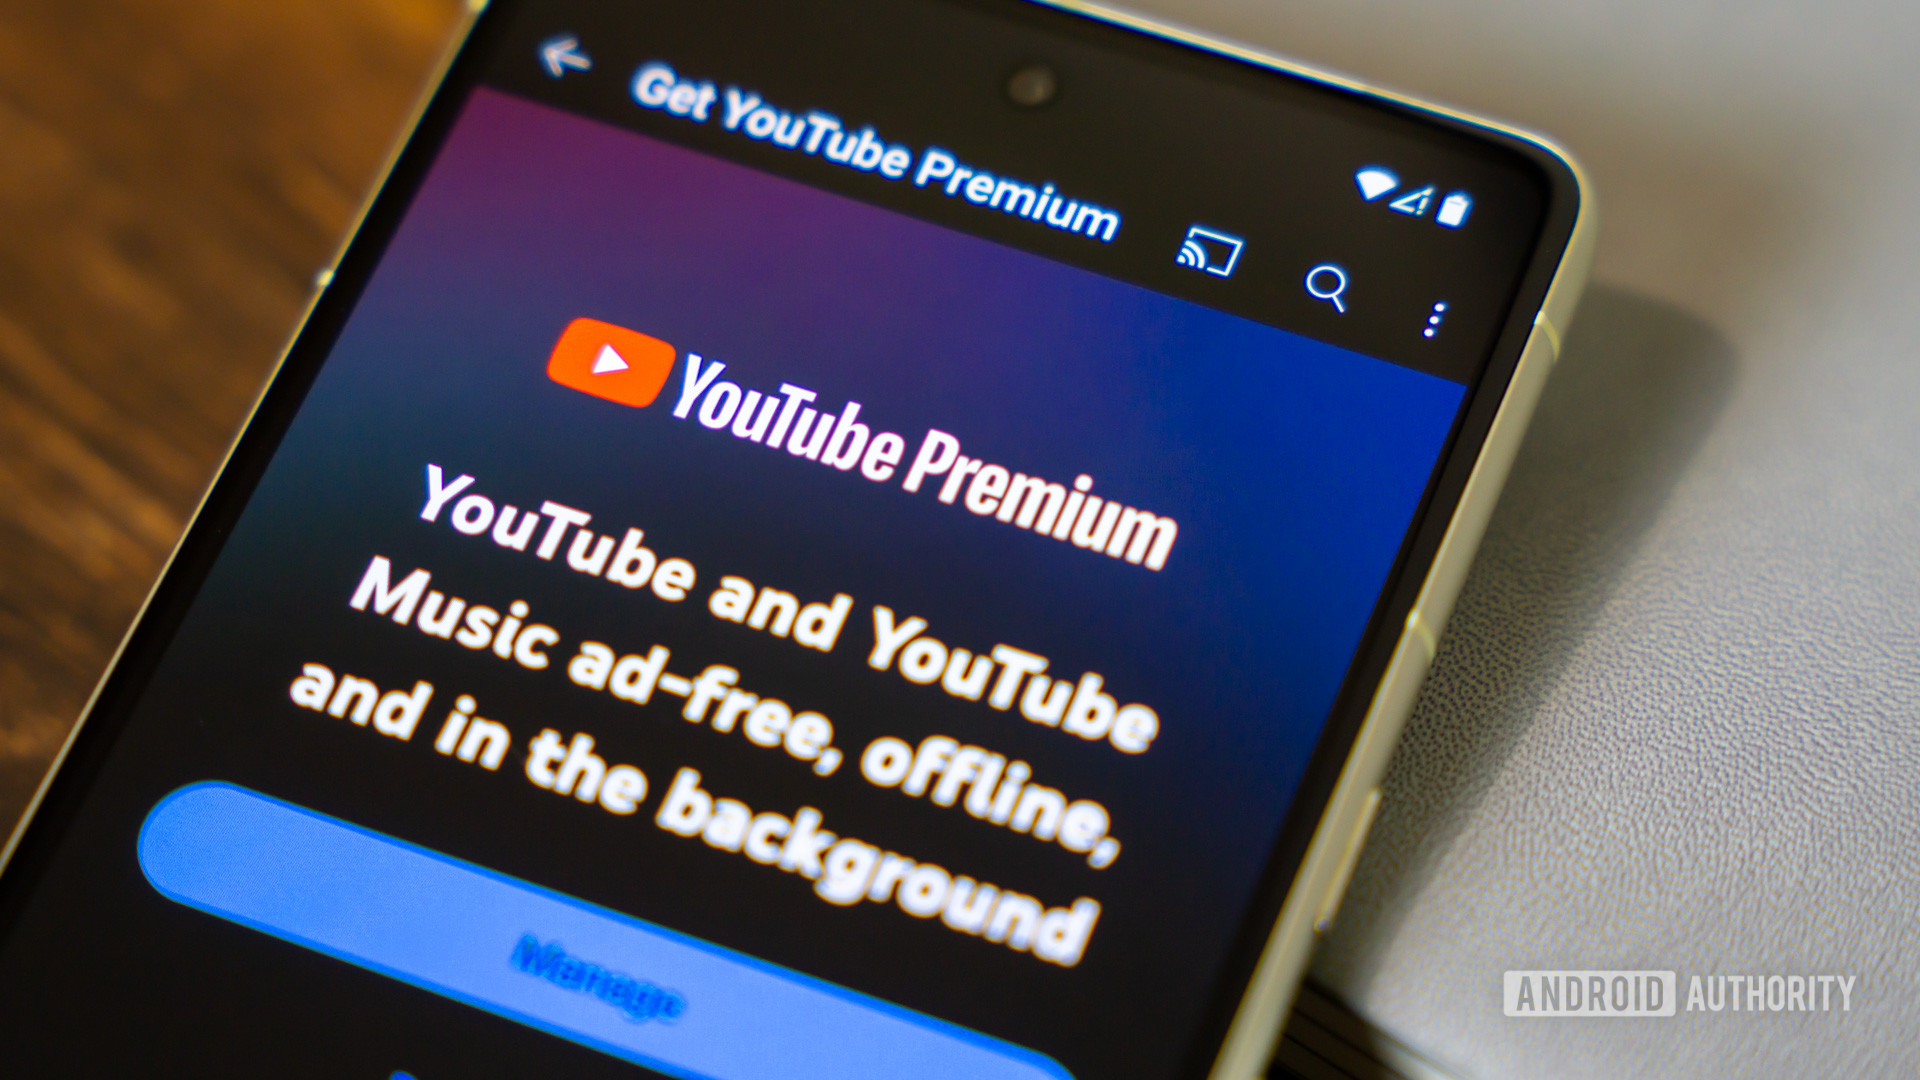 We get it: you hate YouTube ads. But what’s the fix?